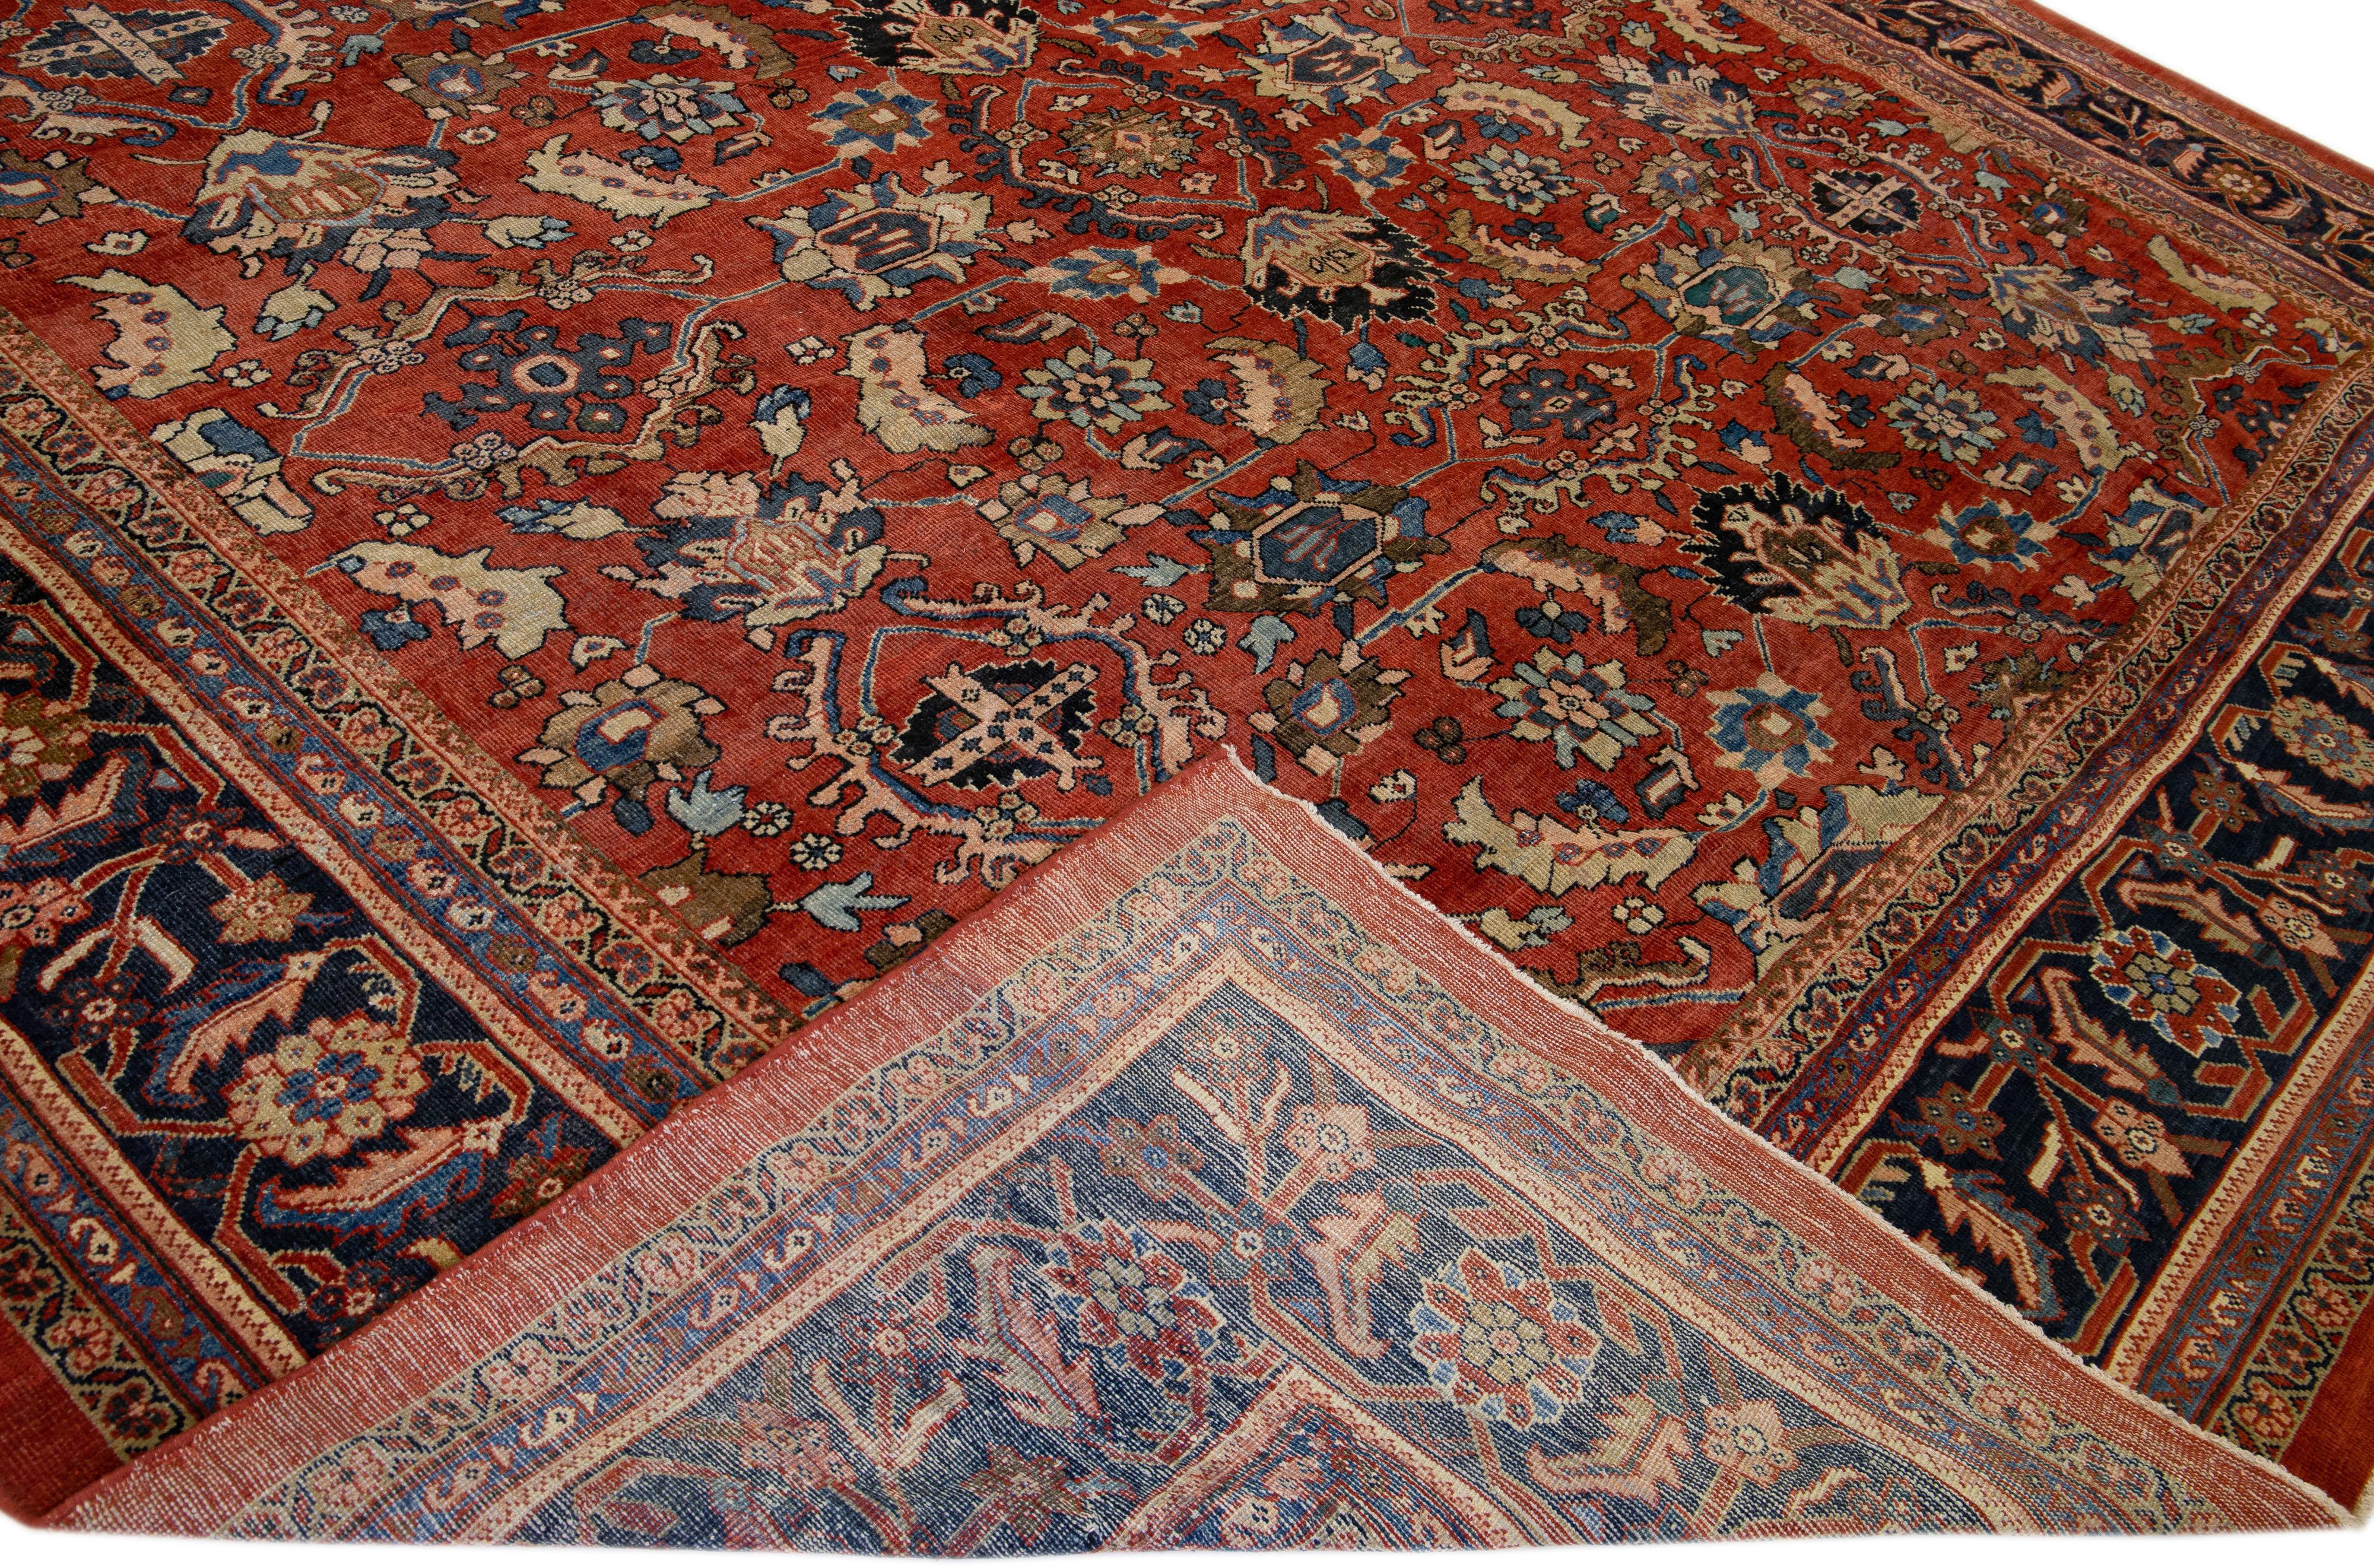 A beautiful Antique Mahal hand-knotted wool rug with a red color field. This rug has a navy blue frame and multicolor accents in an all-over Herati design.

This rug measures 13'5